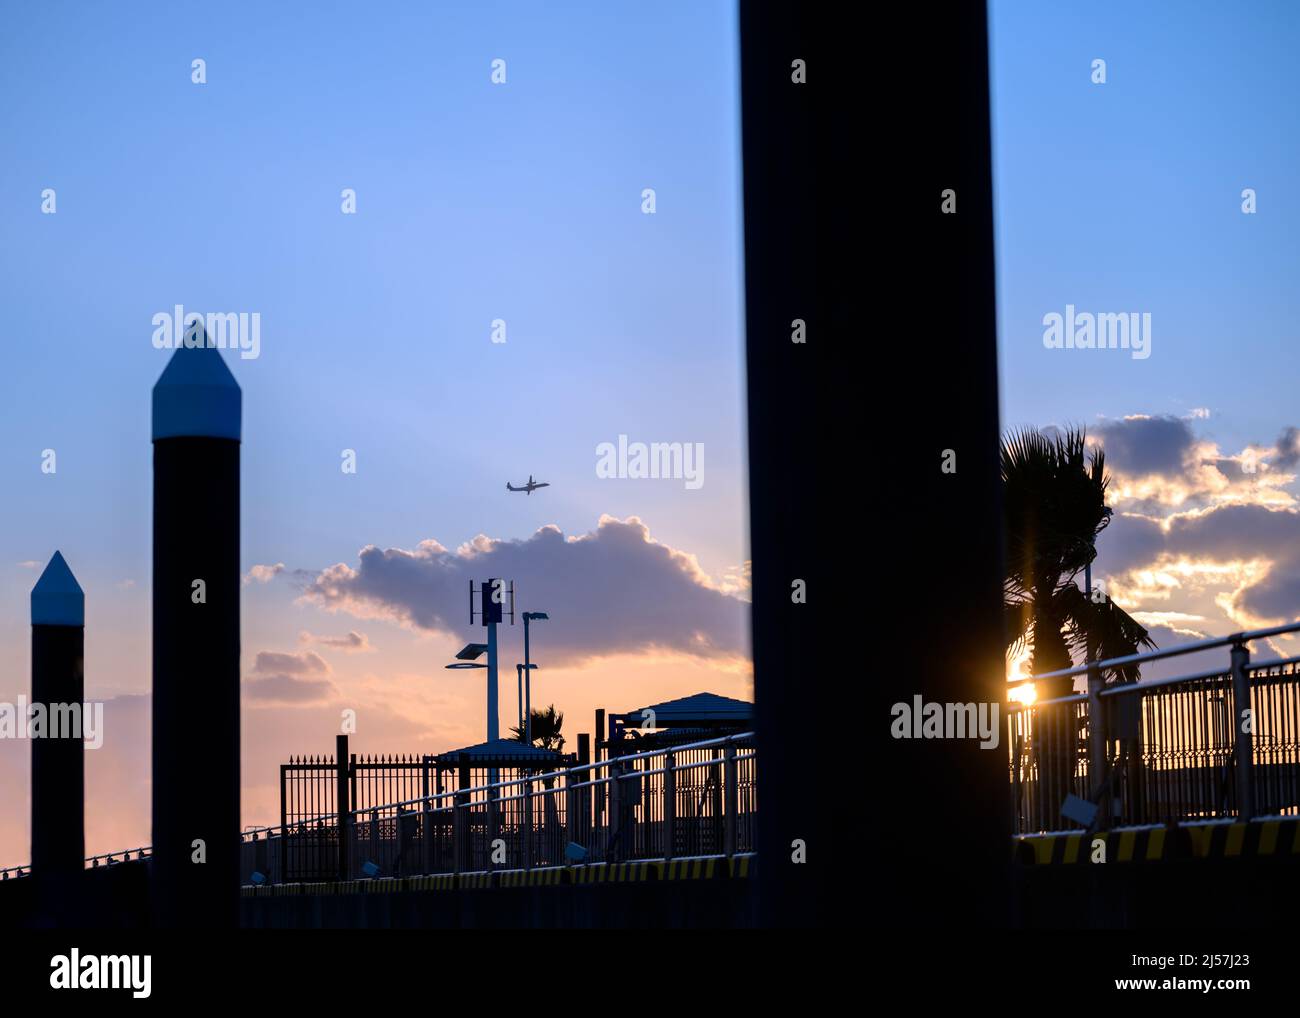 Sunset at a harbor with an airplane in the sky. Blue hour. Stock Photo